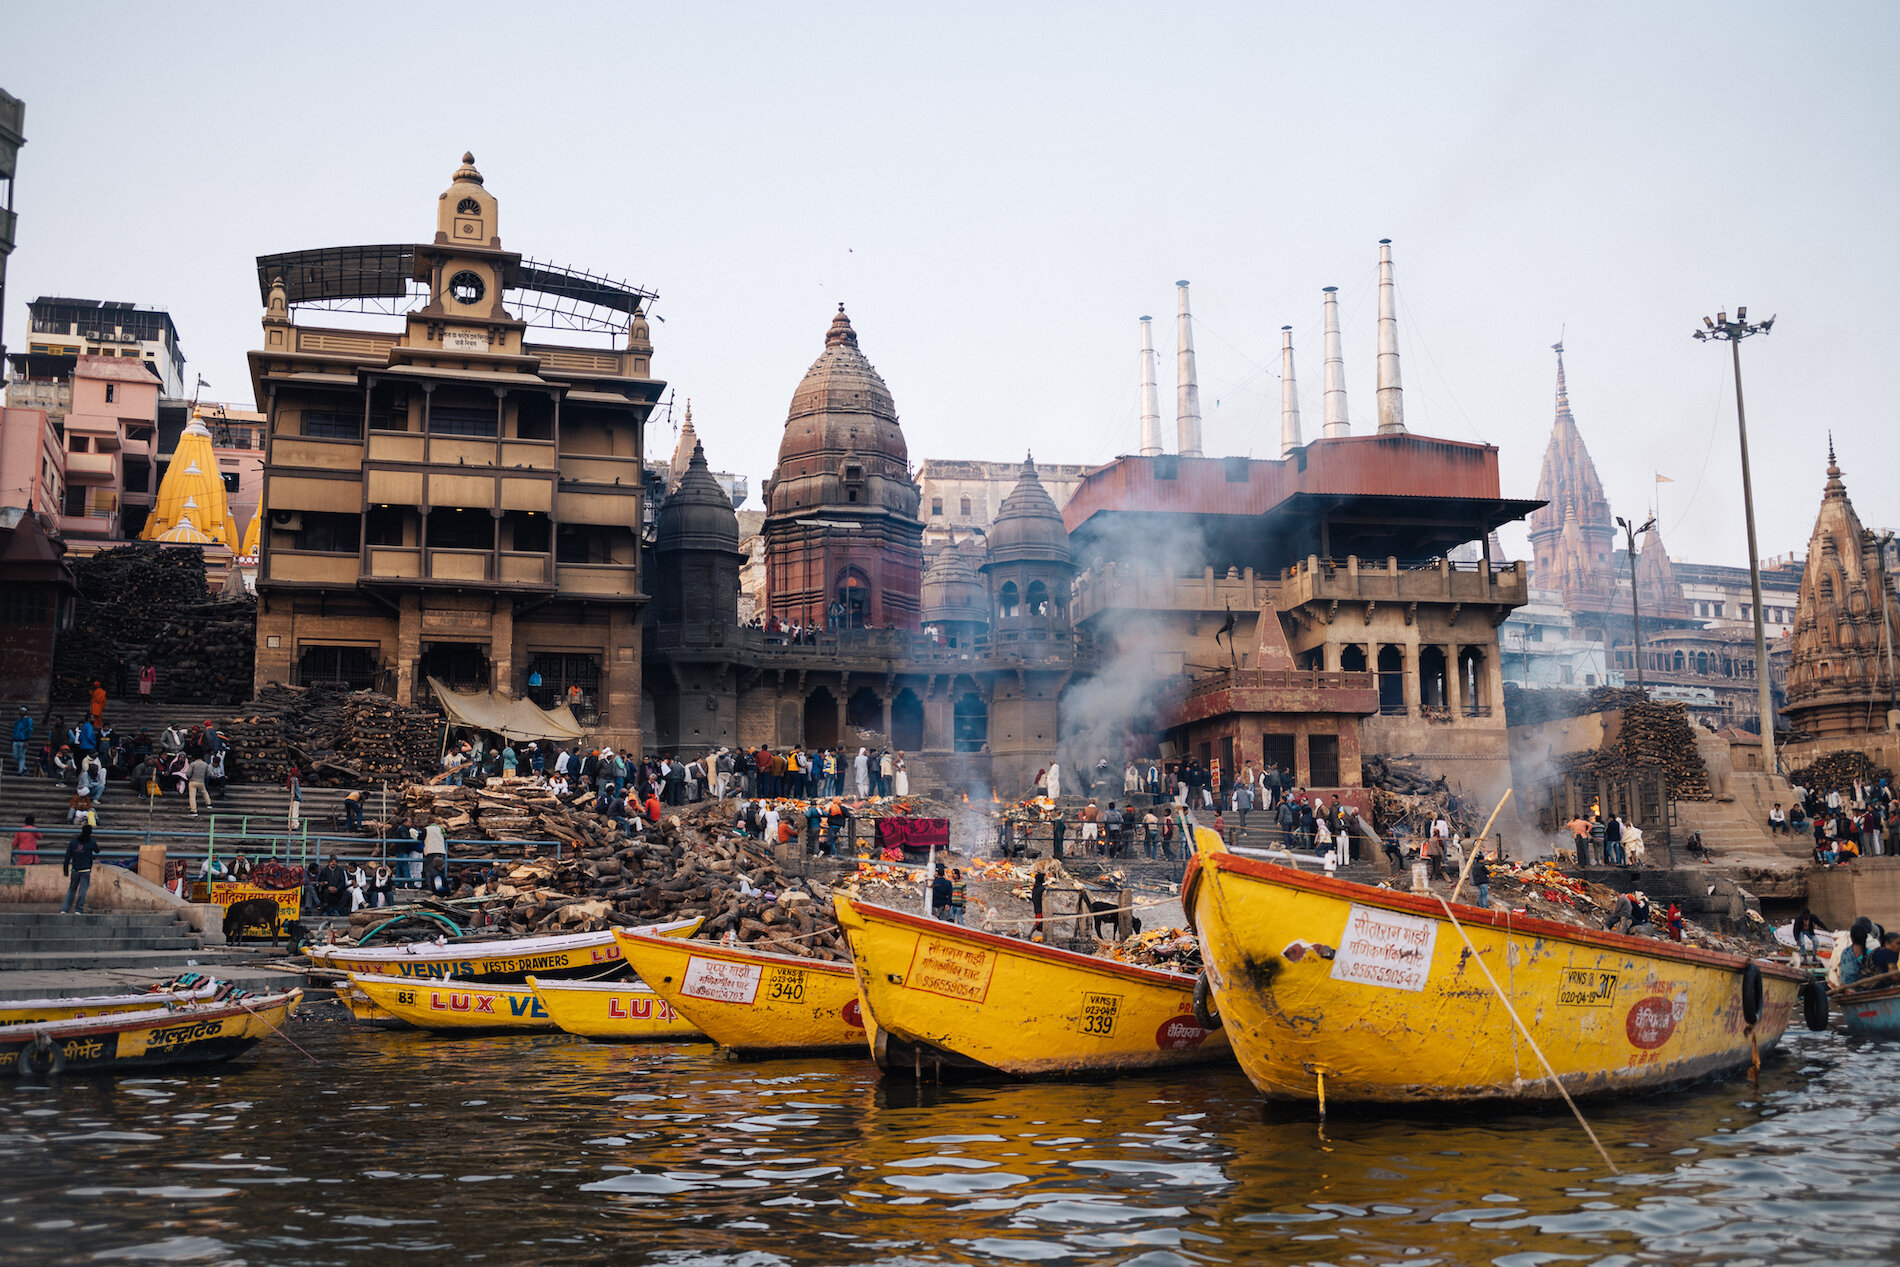  The Manikarnika Ghat - one of two places where cremations take place - as seen from a boat on the Ganges. 